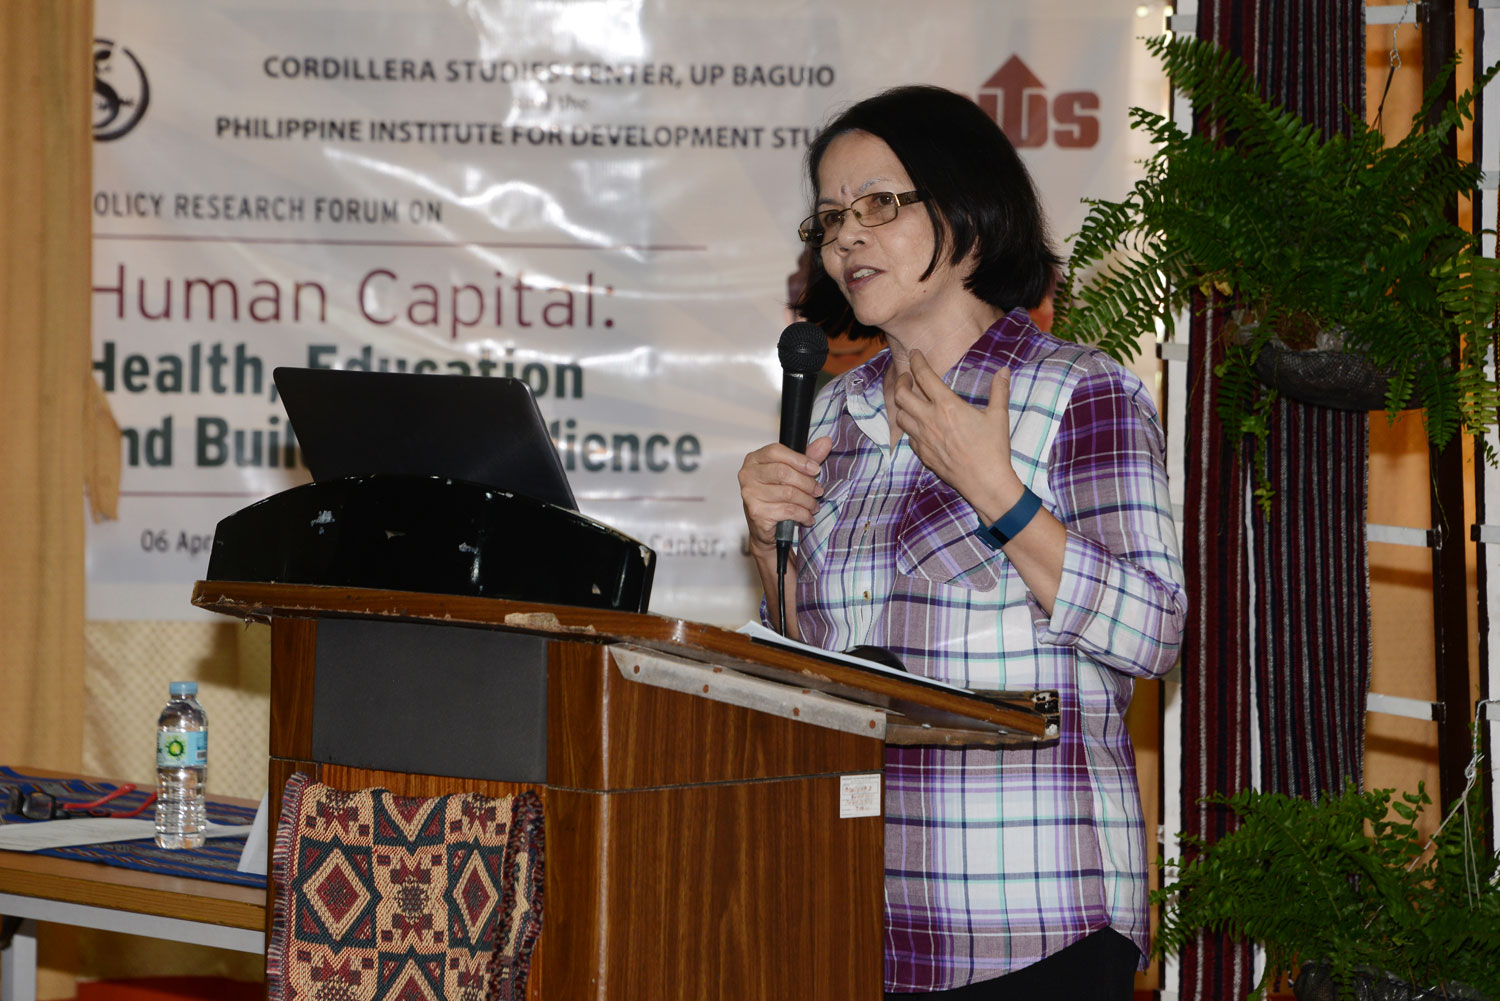 Policy Research Forum on Human Capital: Health, Education, and Building Resilience-DSC_6115.jpg